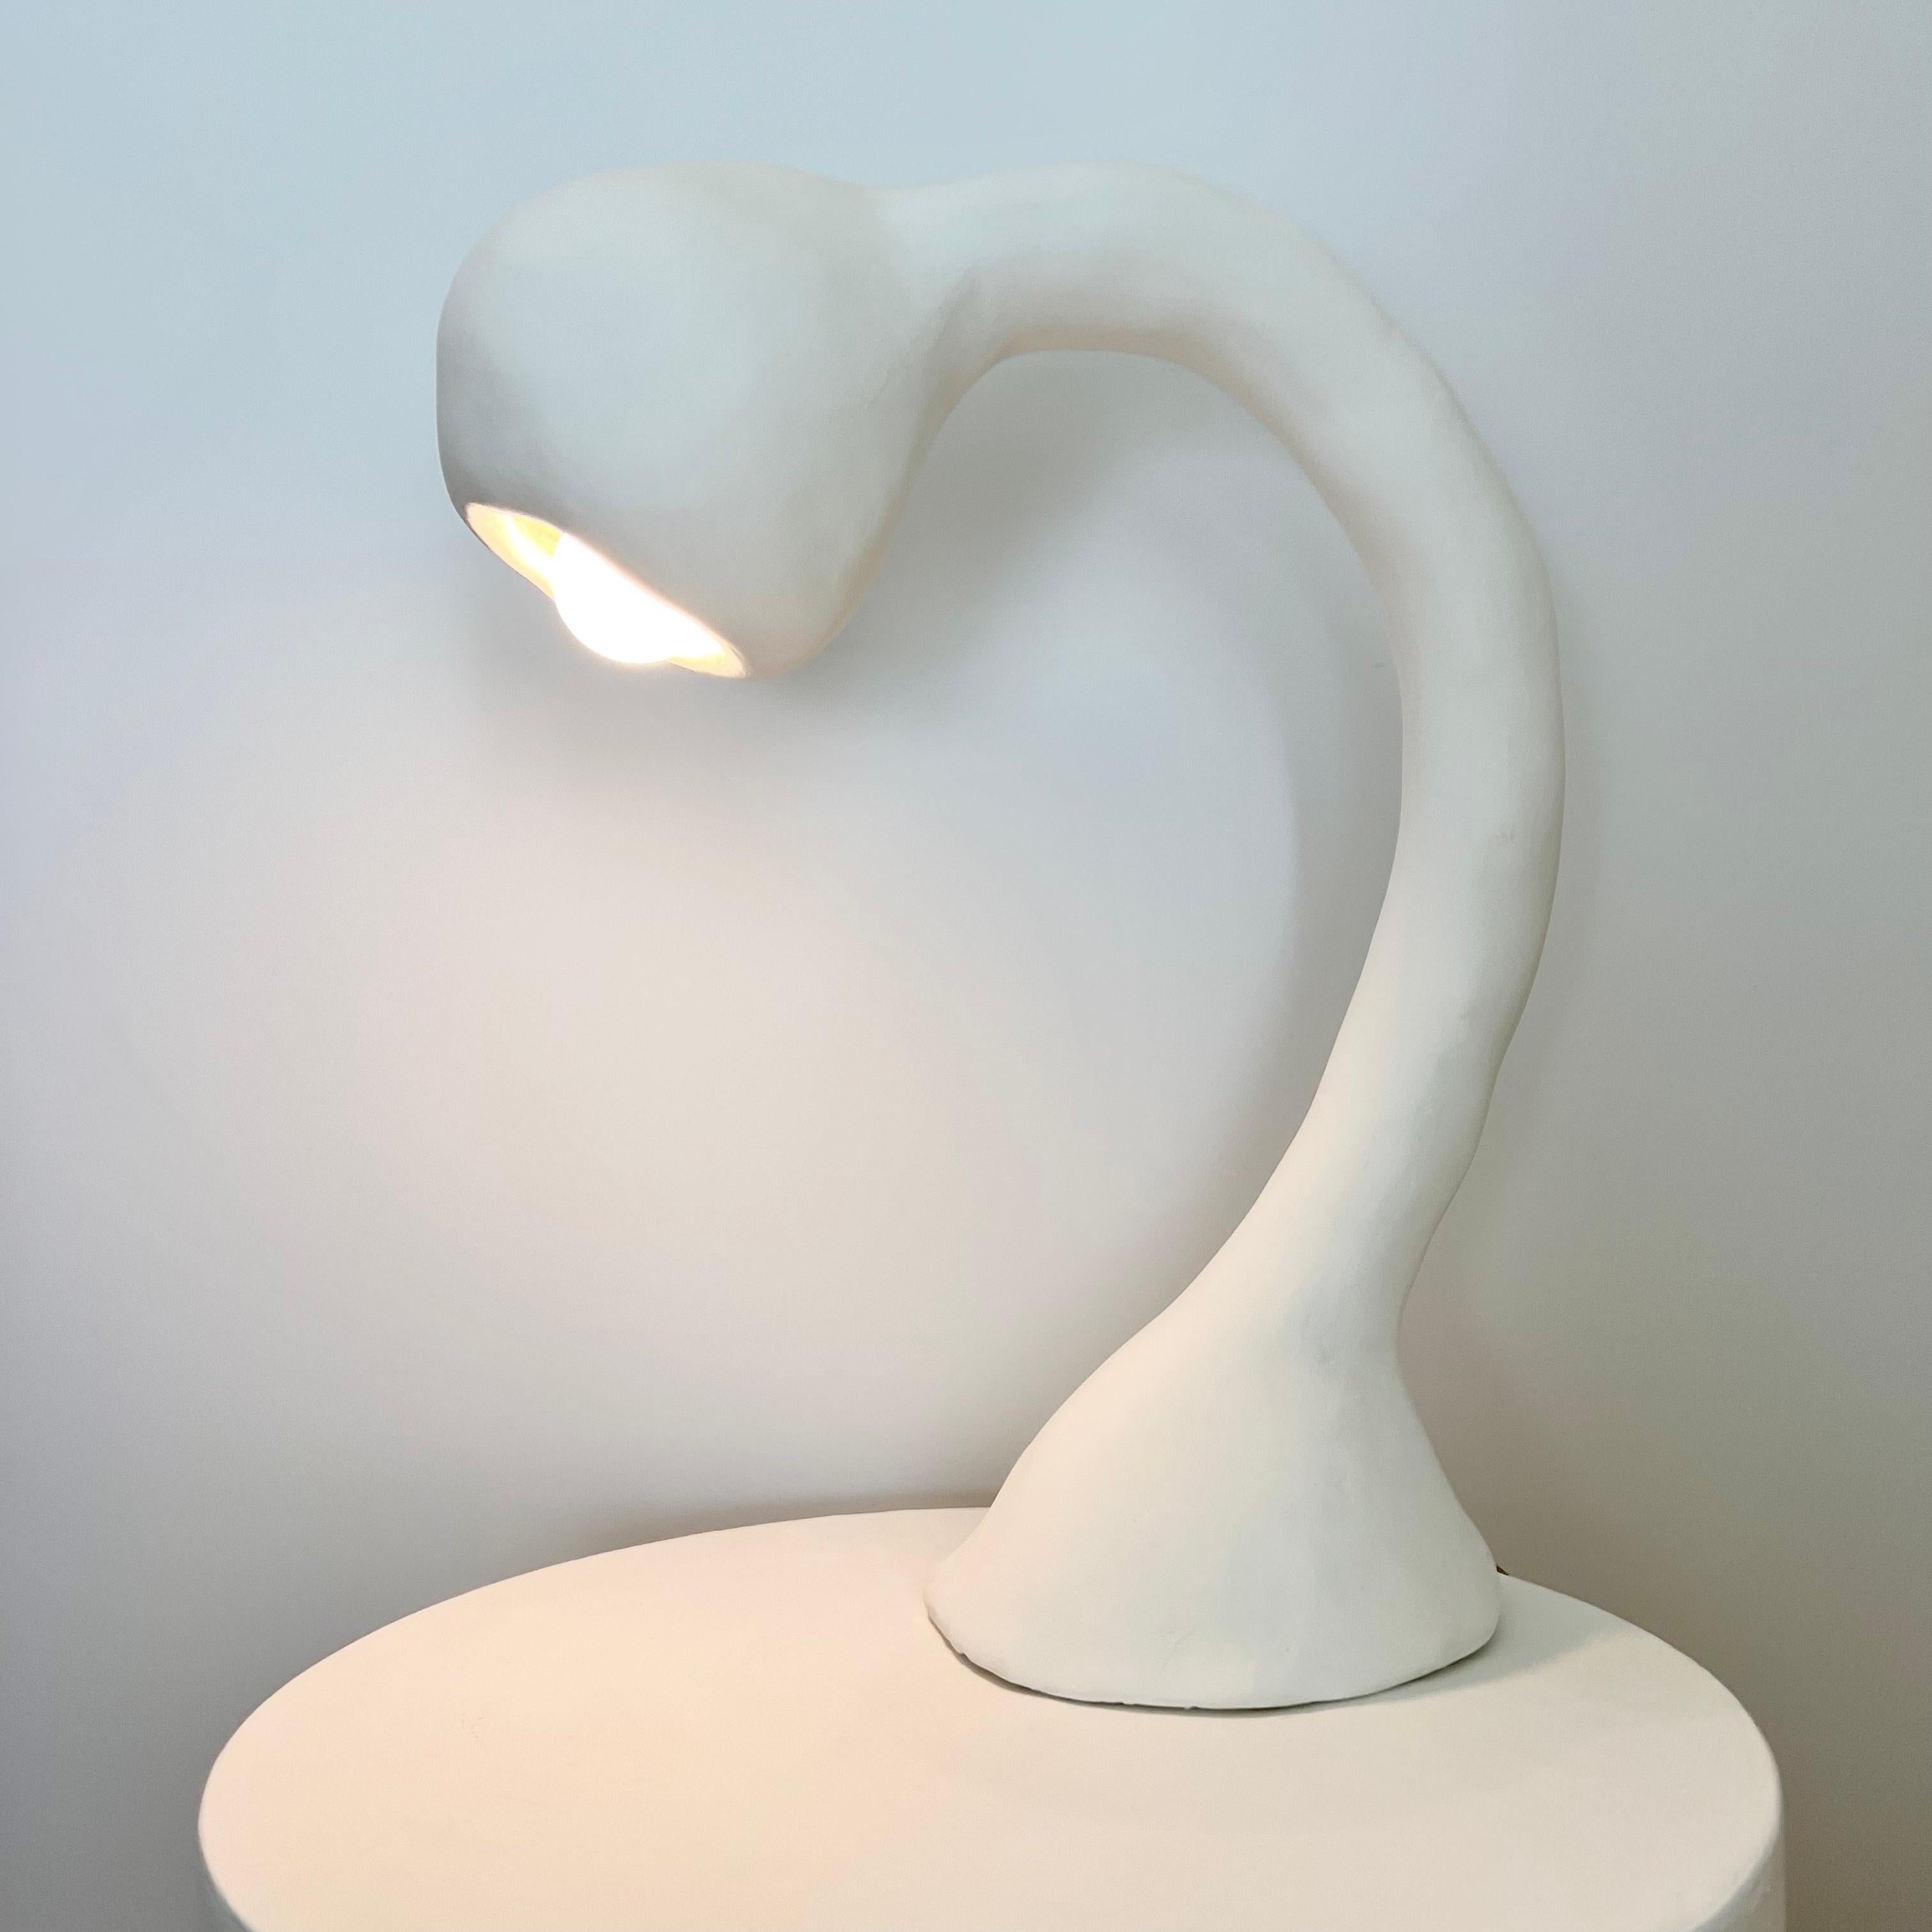 American Biomorphic Line by Studio Chora, Table Lamp, White Lime Plaster, Made-To-Order